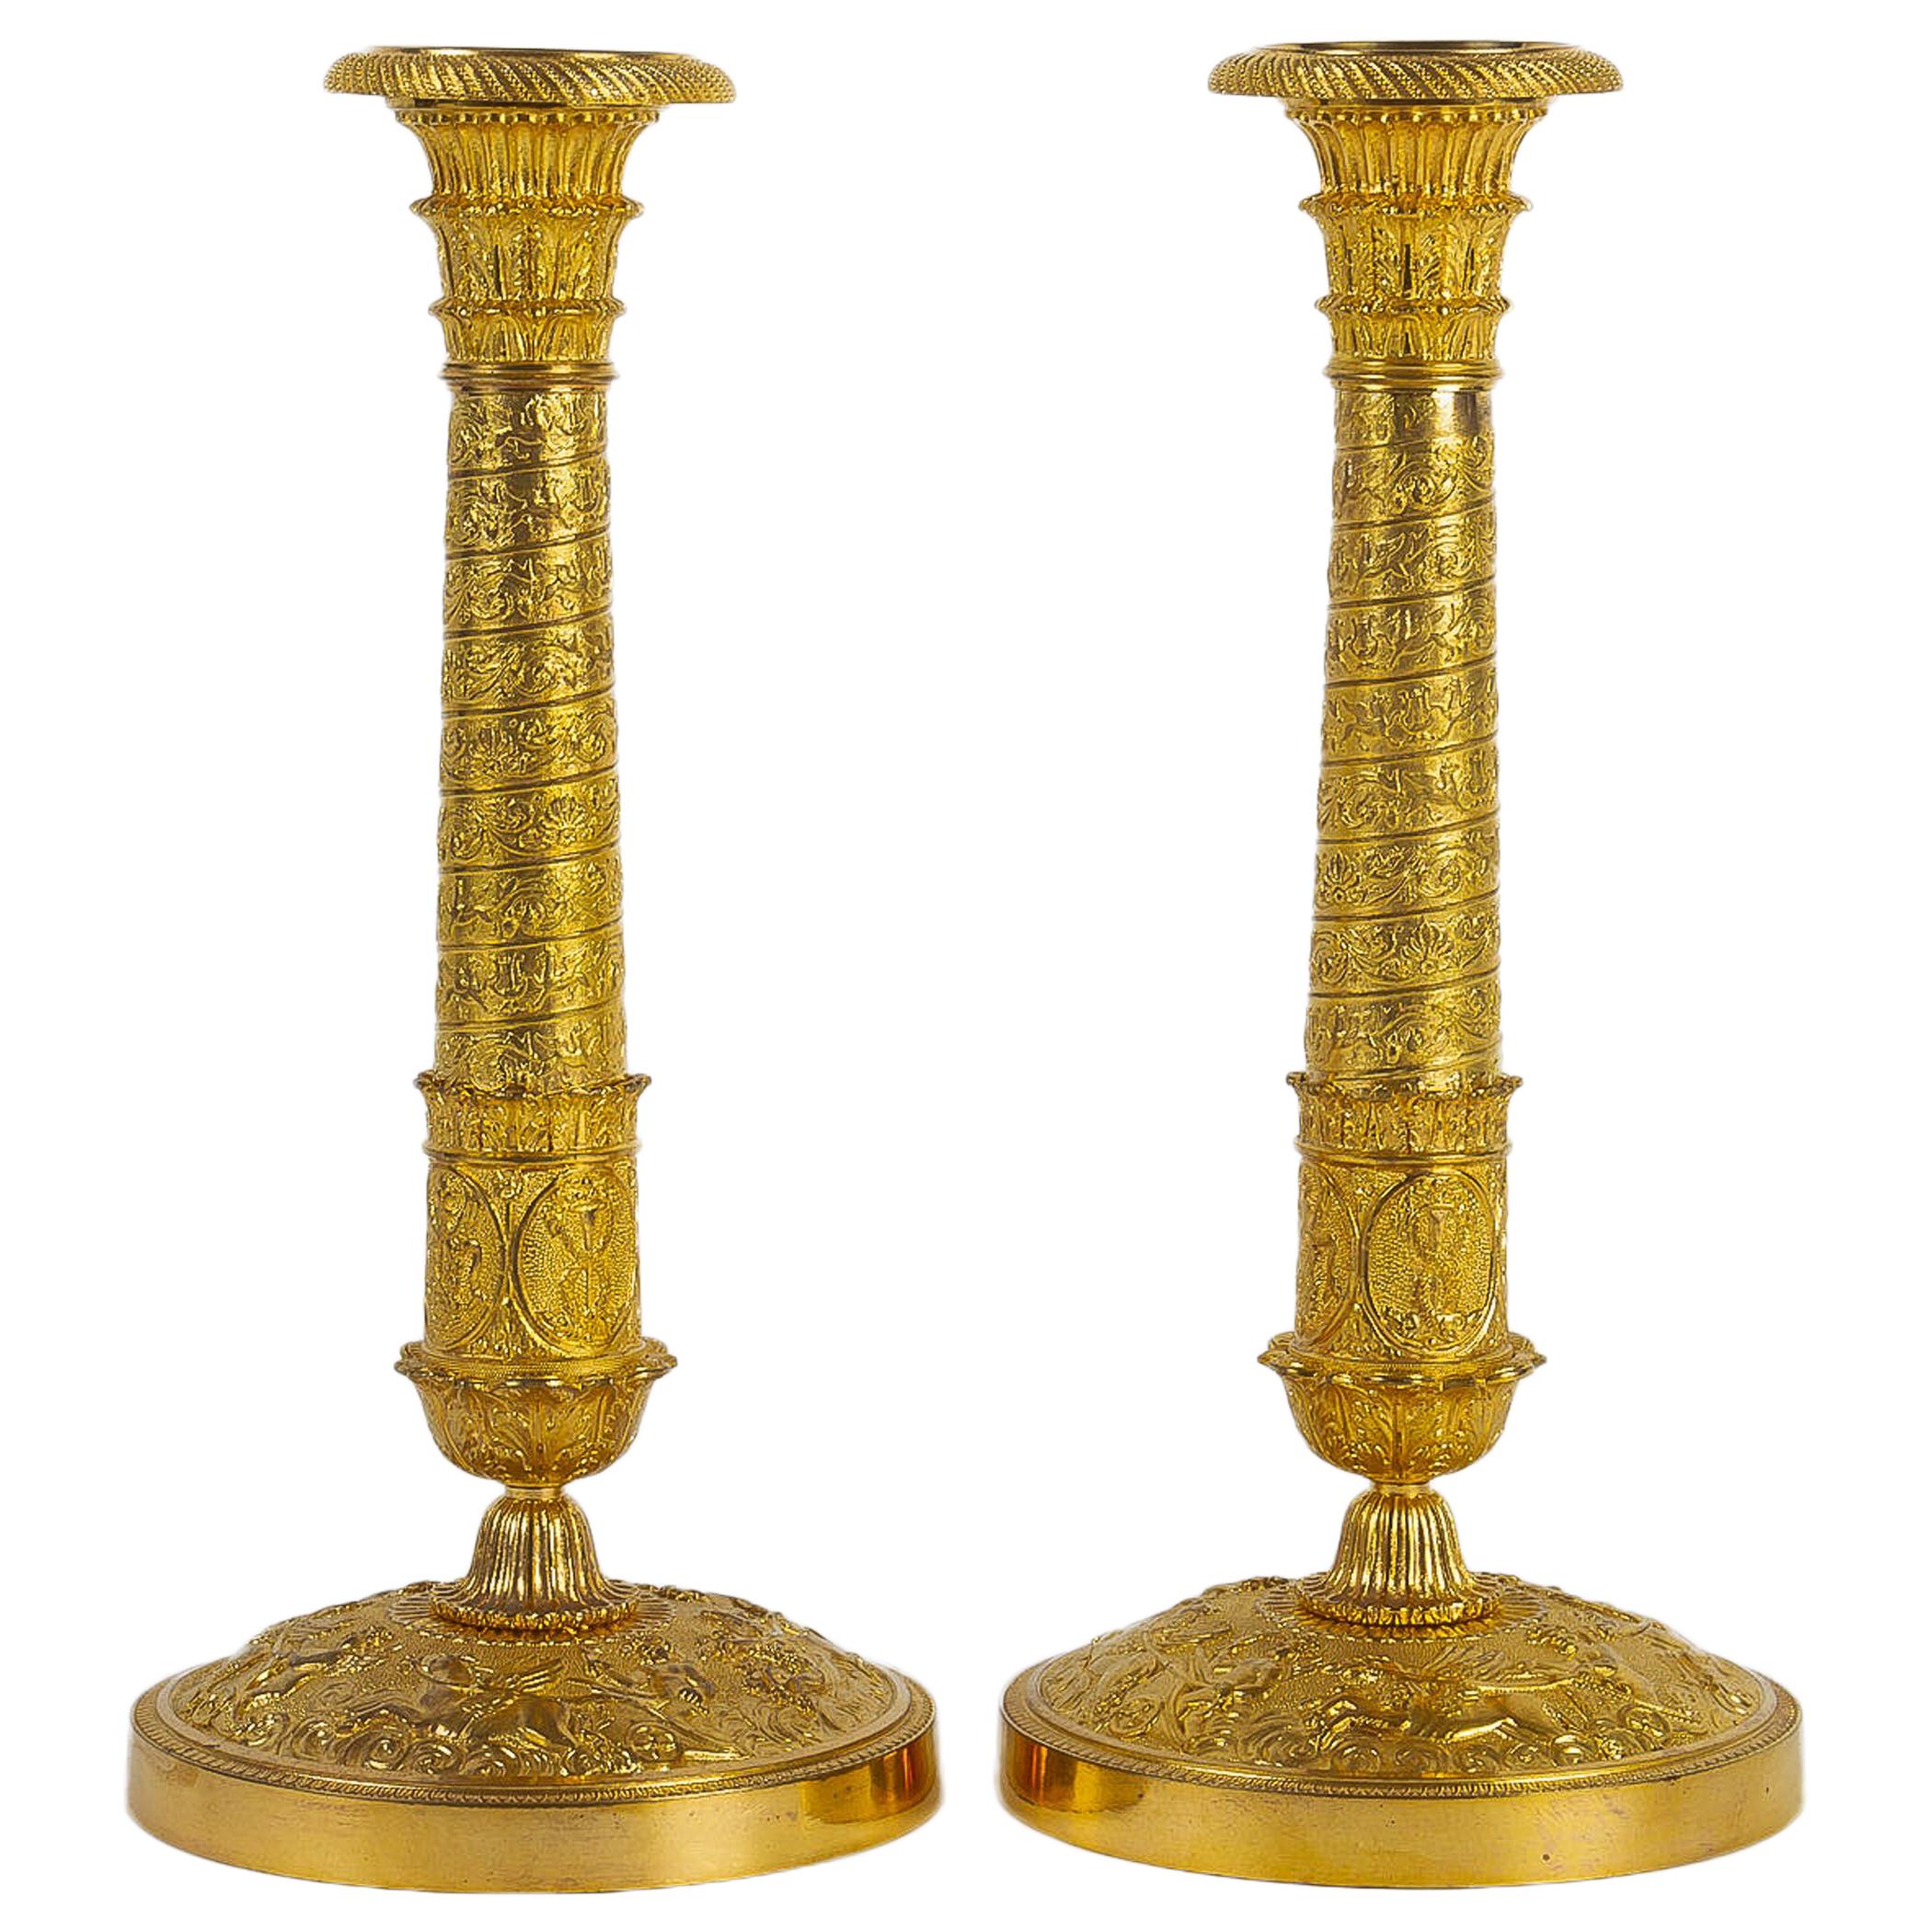 French Empire Period Pair of Gilt-Bronze with Twisted-Barrels Candlesticks, 1810